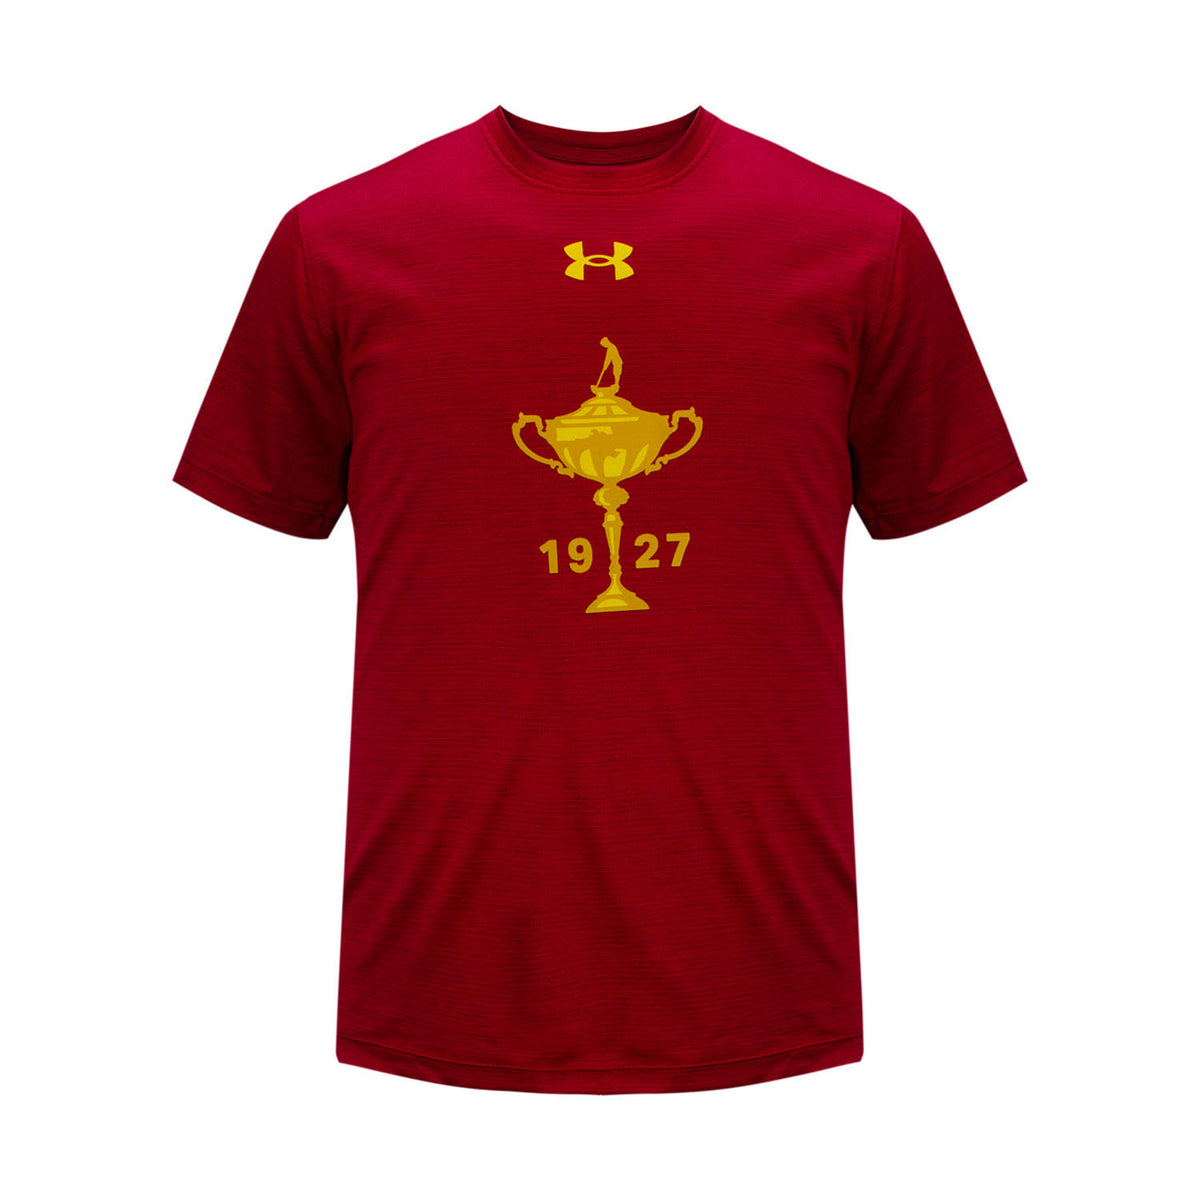 Ryder Cup Boys Youth Vent Tech Tee in Red- Front View